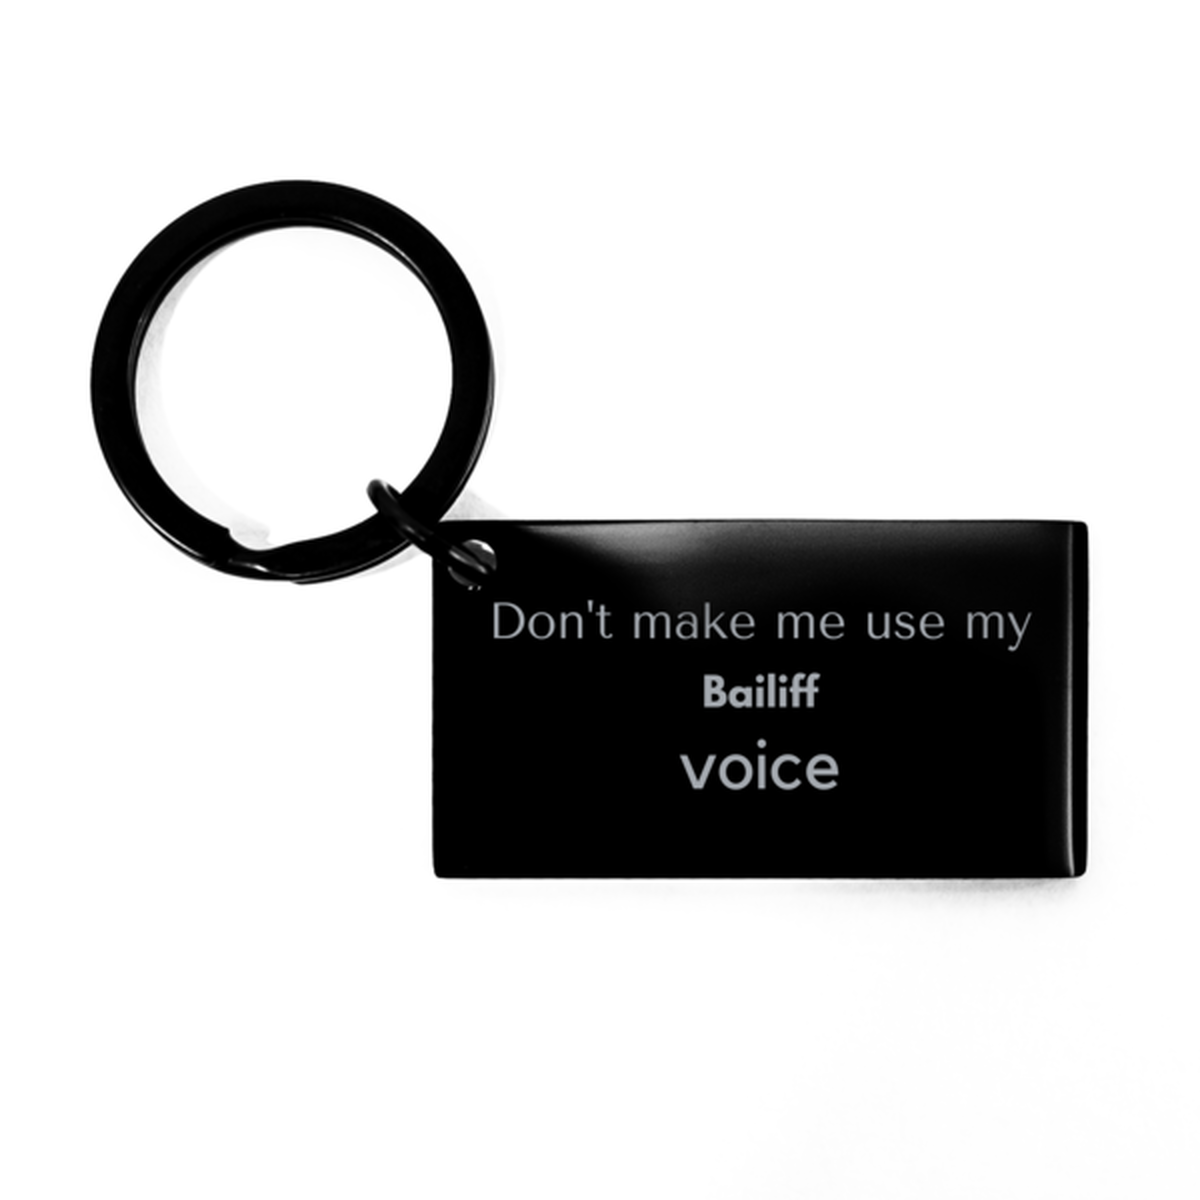 Don't make me use my Bailiff voice, Sarcasm Bailiff Gifts, Christmas Bailiff Keychain Birthday Unique Gifts For Bailiff Coworkers, Men, Women, Colleague, Friends